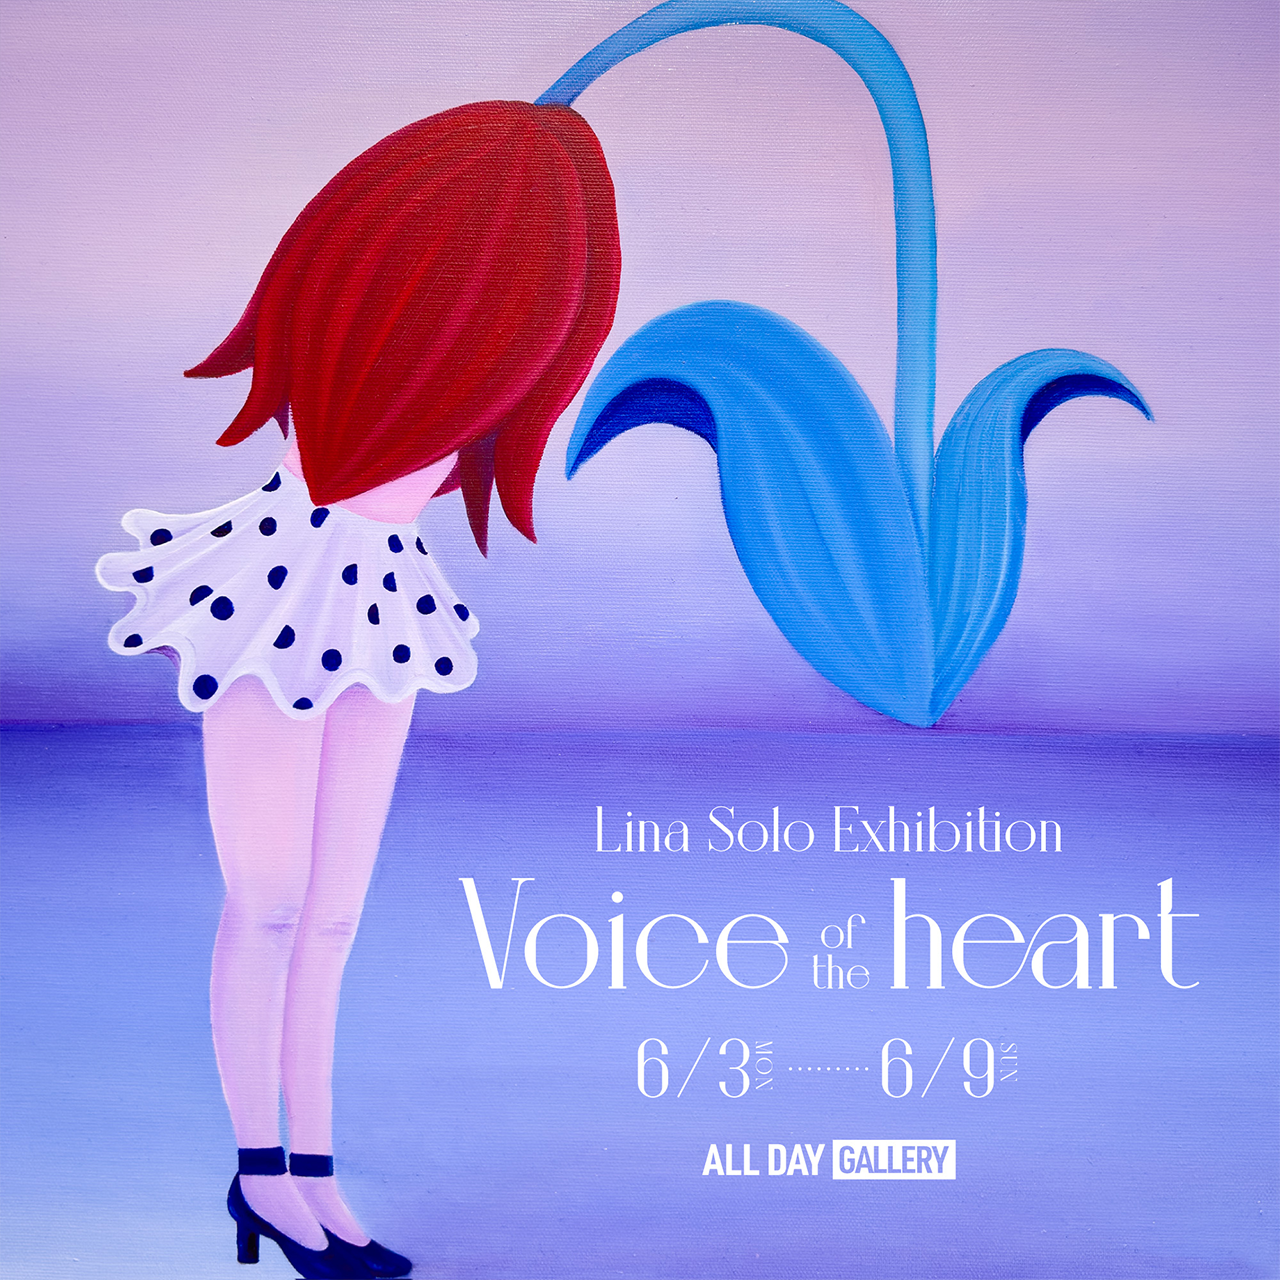 Lina Solo Exhibition “Voice of the heart”